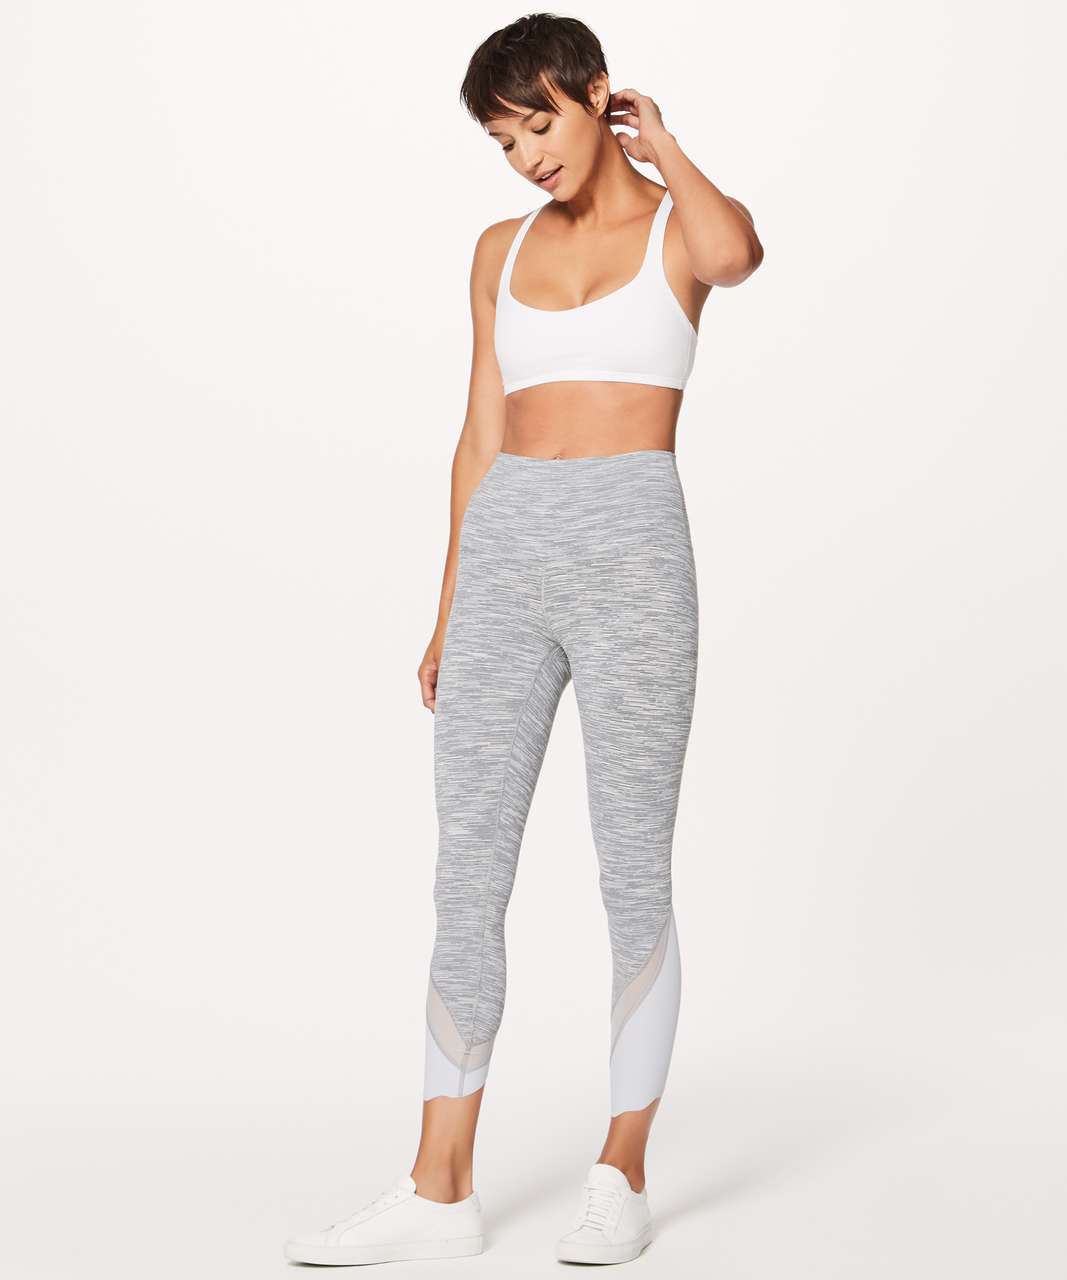 Lululemon Wunder Under Crop II (Special Edition) *Scallop 23" - Wee Are From Space Silver Spoon / Silver Spoon